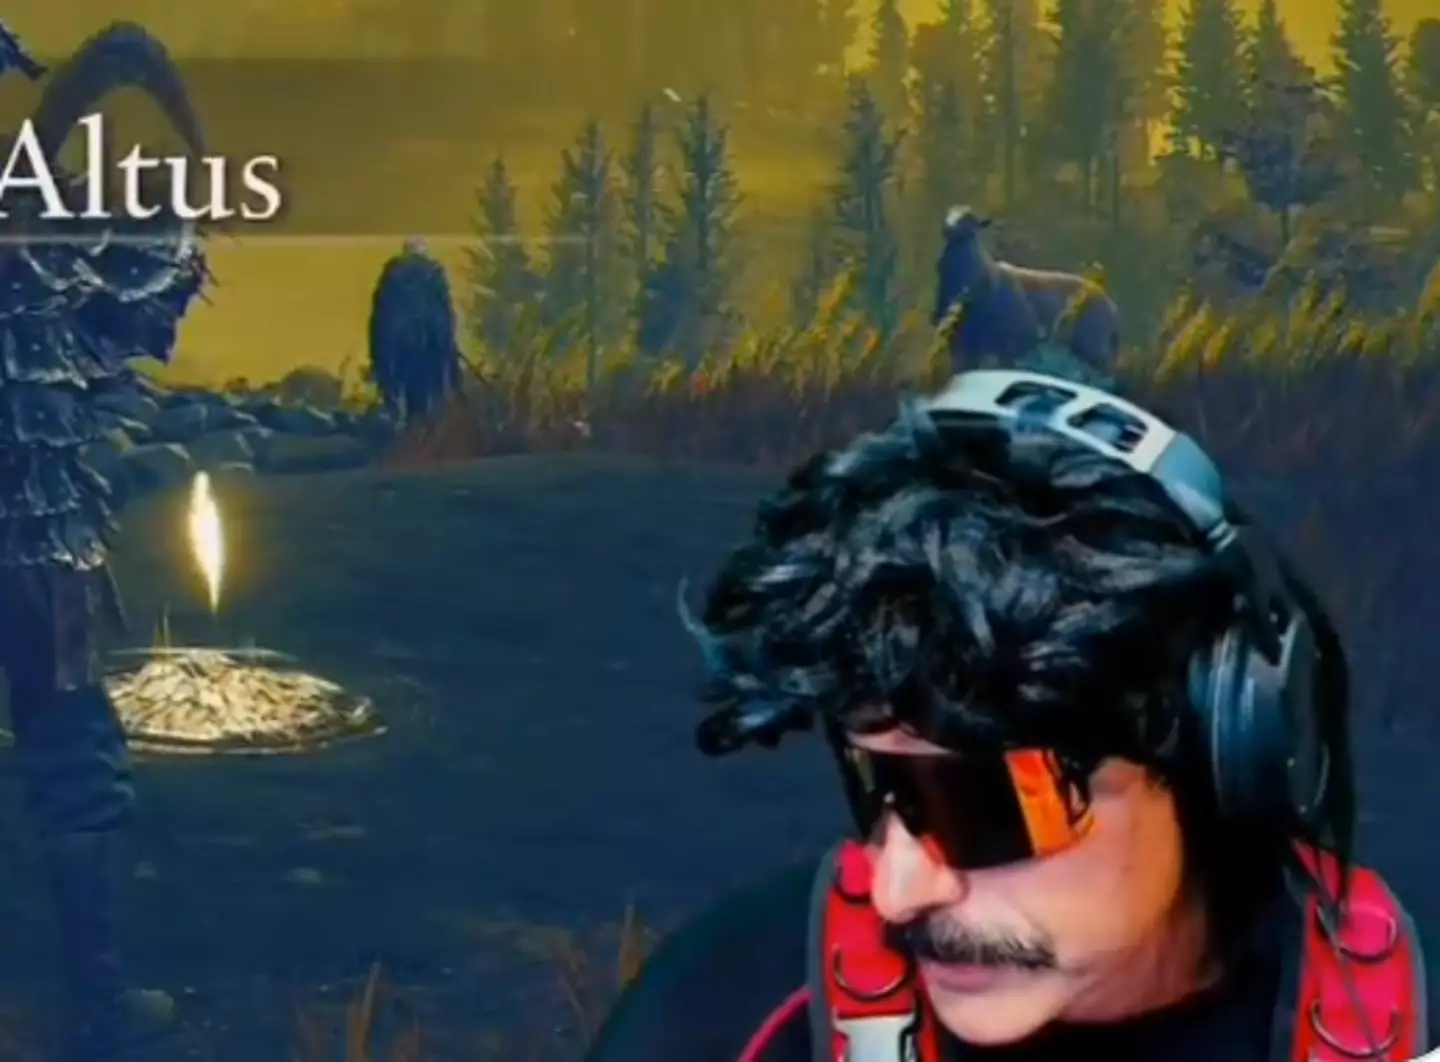 Dr DisRespect appeared to receive a message mid-stream. (YouTube/Dr DisRespect)